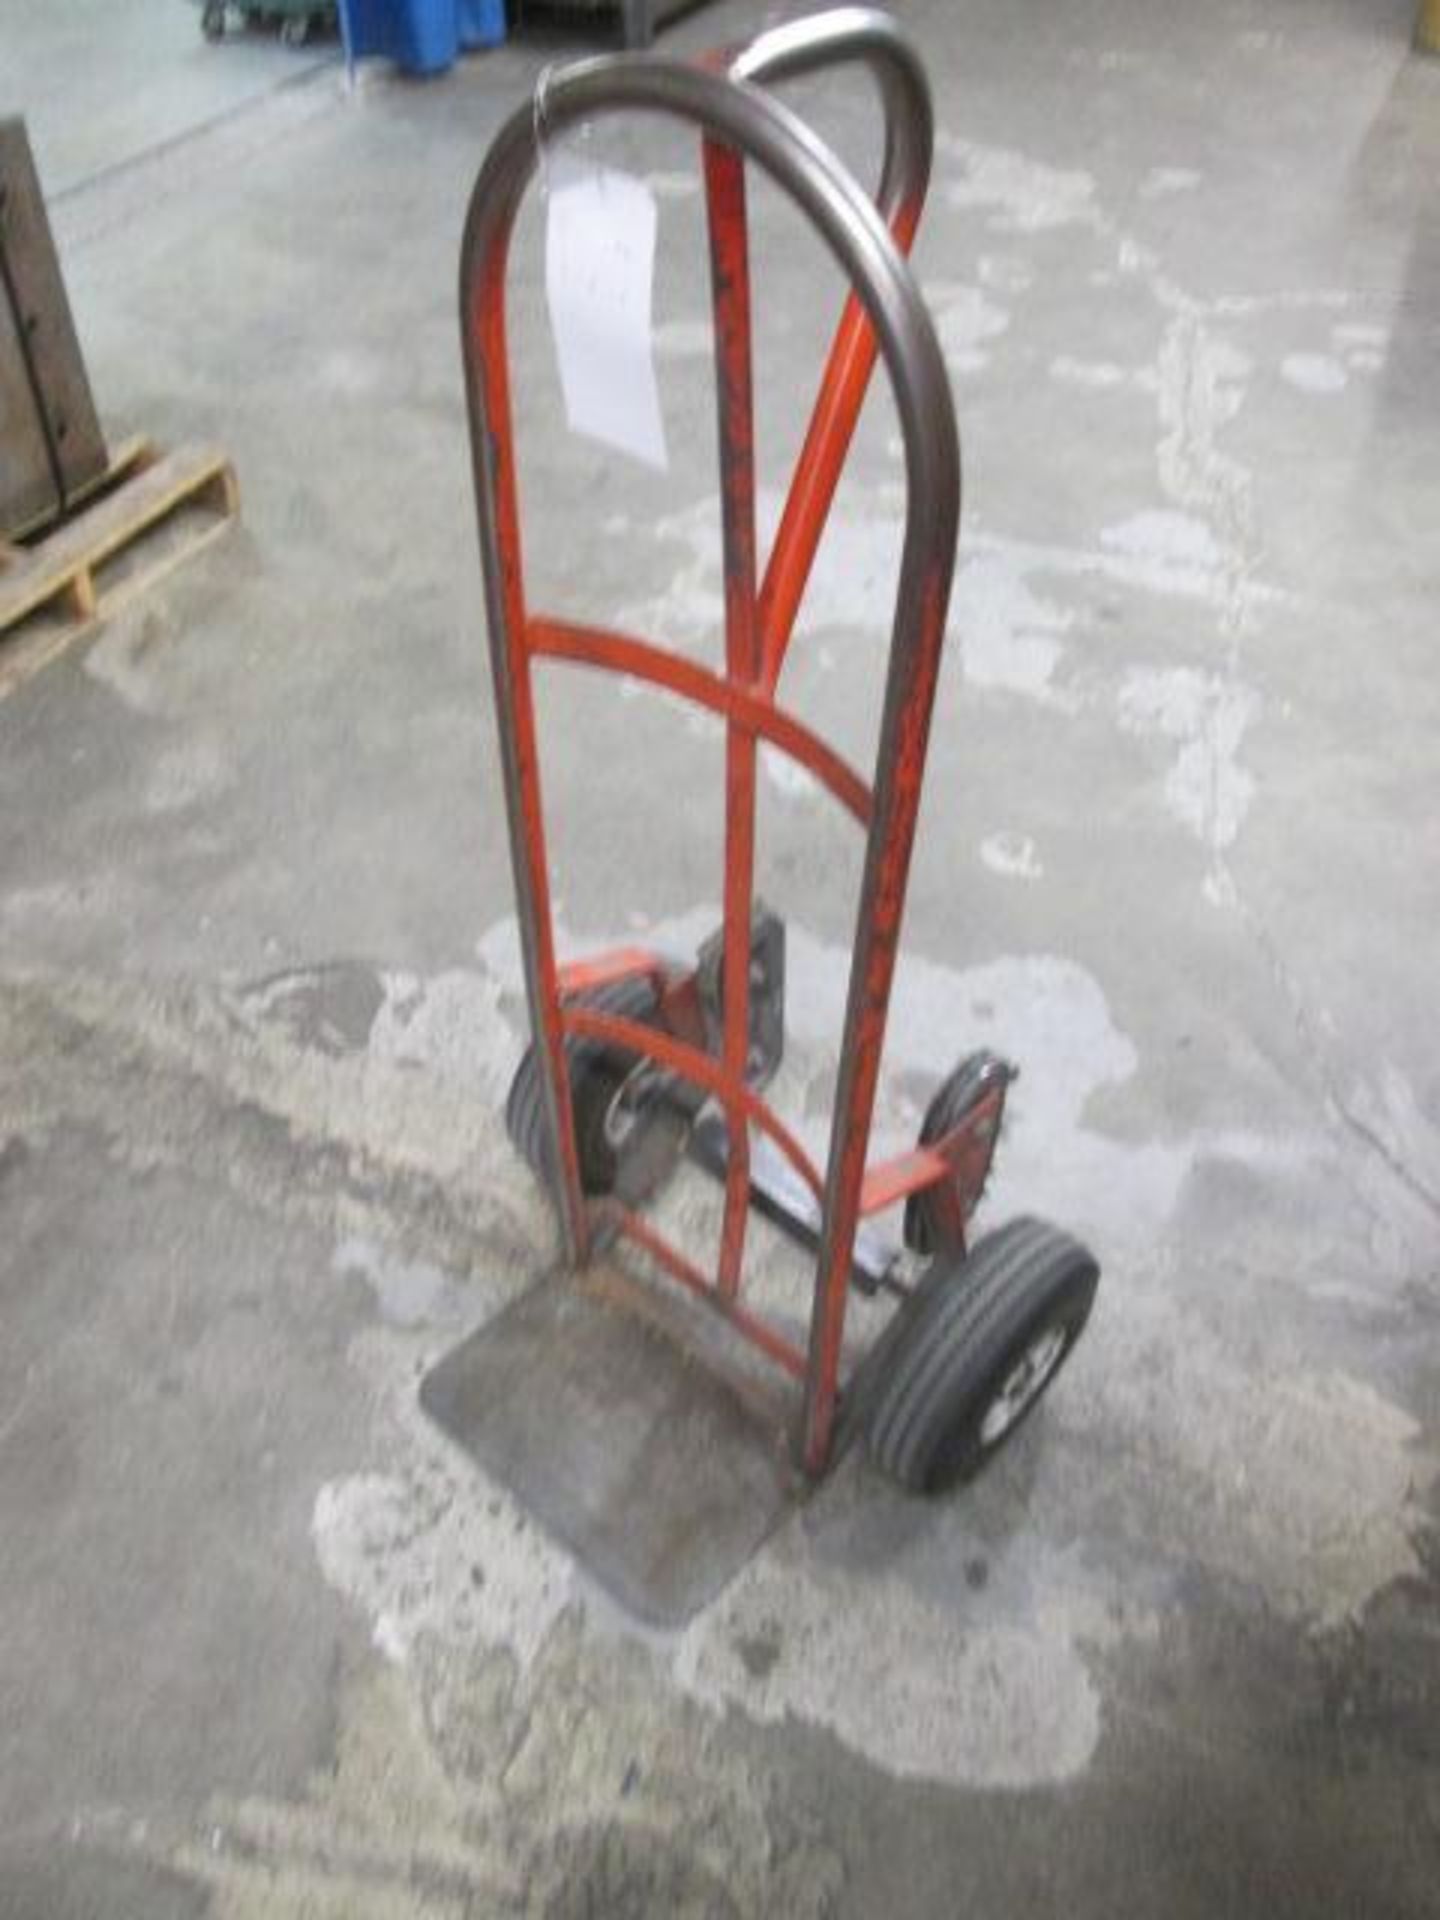 Hand Truck - Image 3 of 3